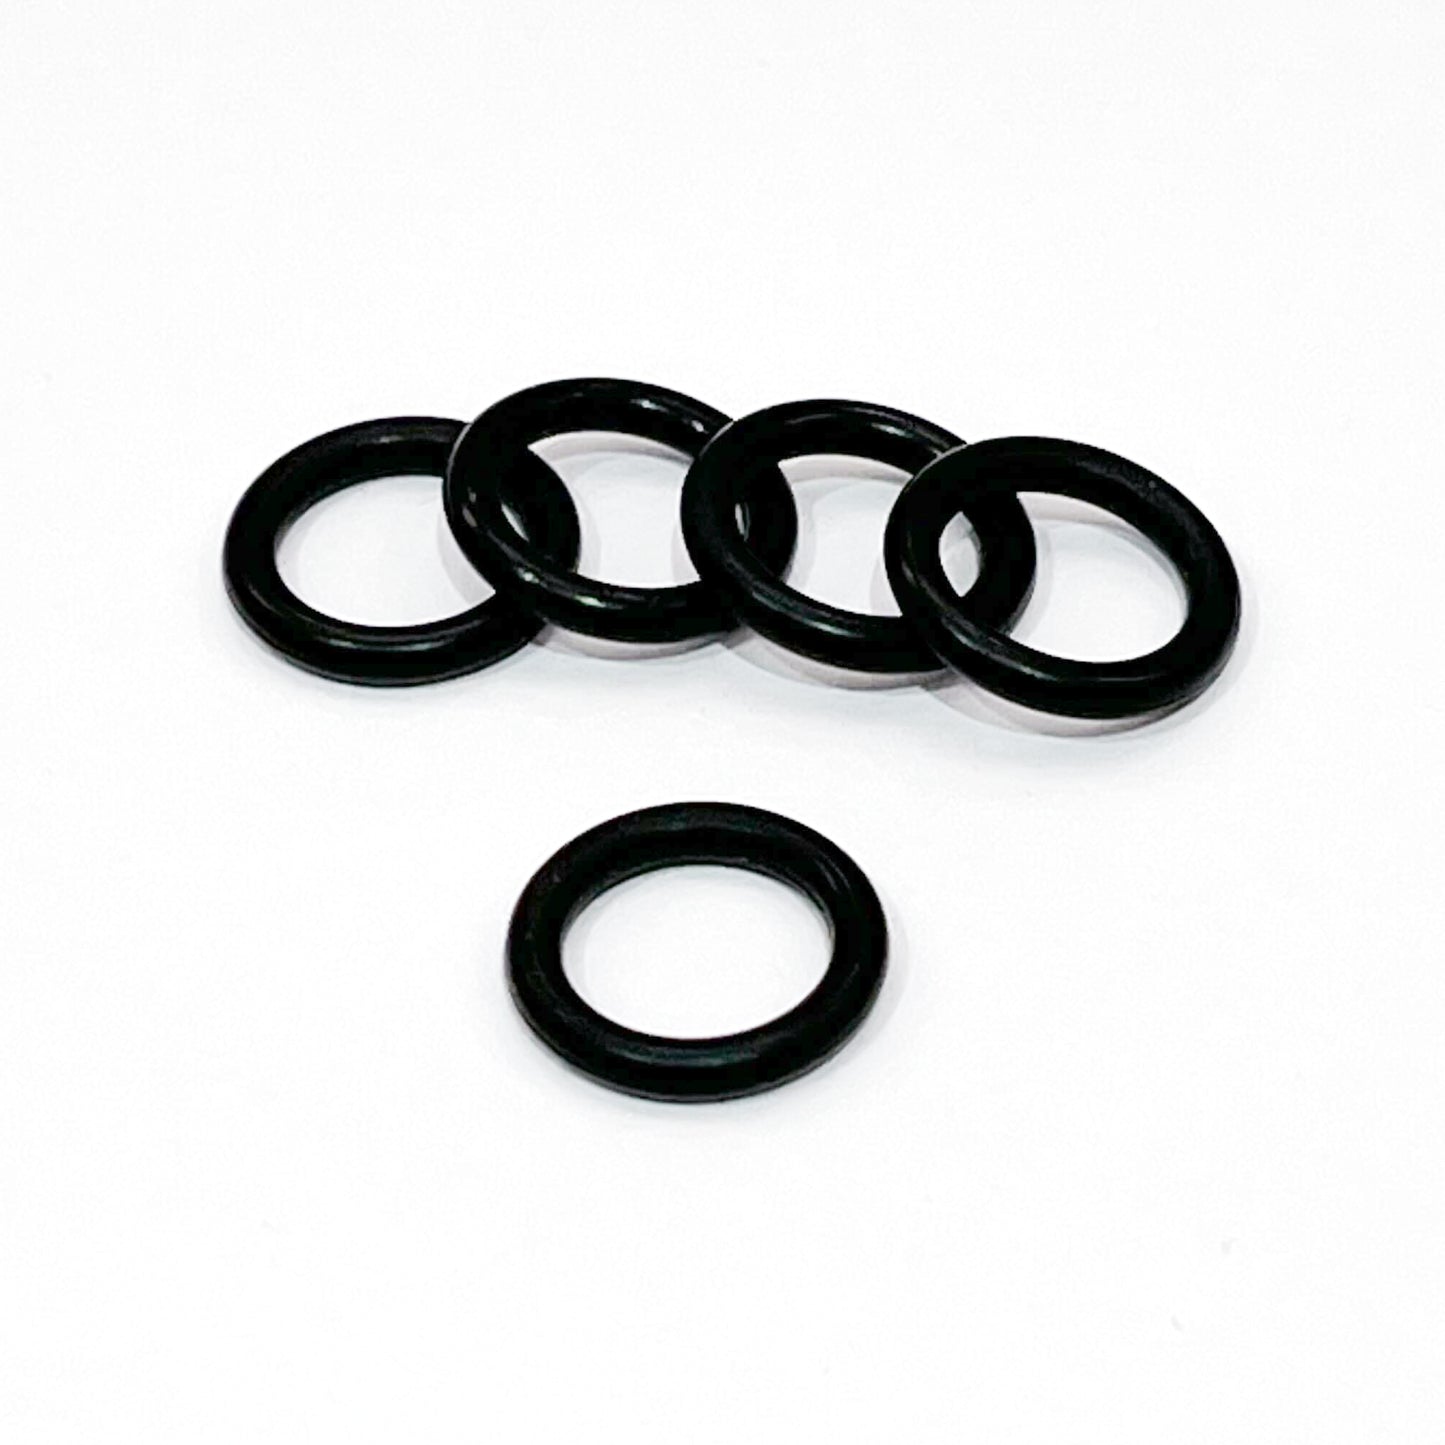 NOVA Replacement Plunger O-ring - 5 pack